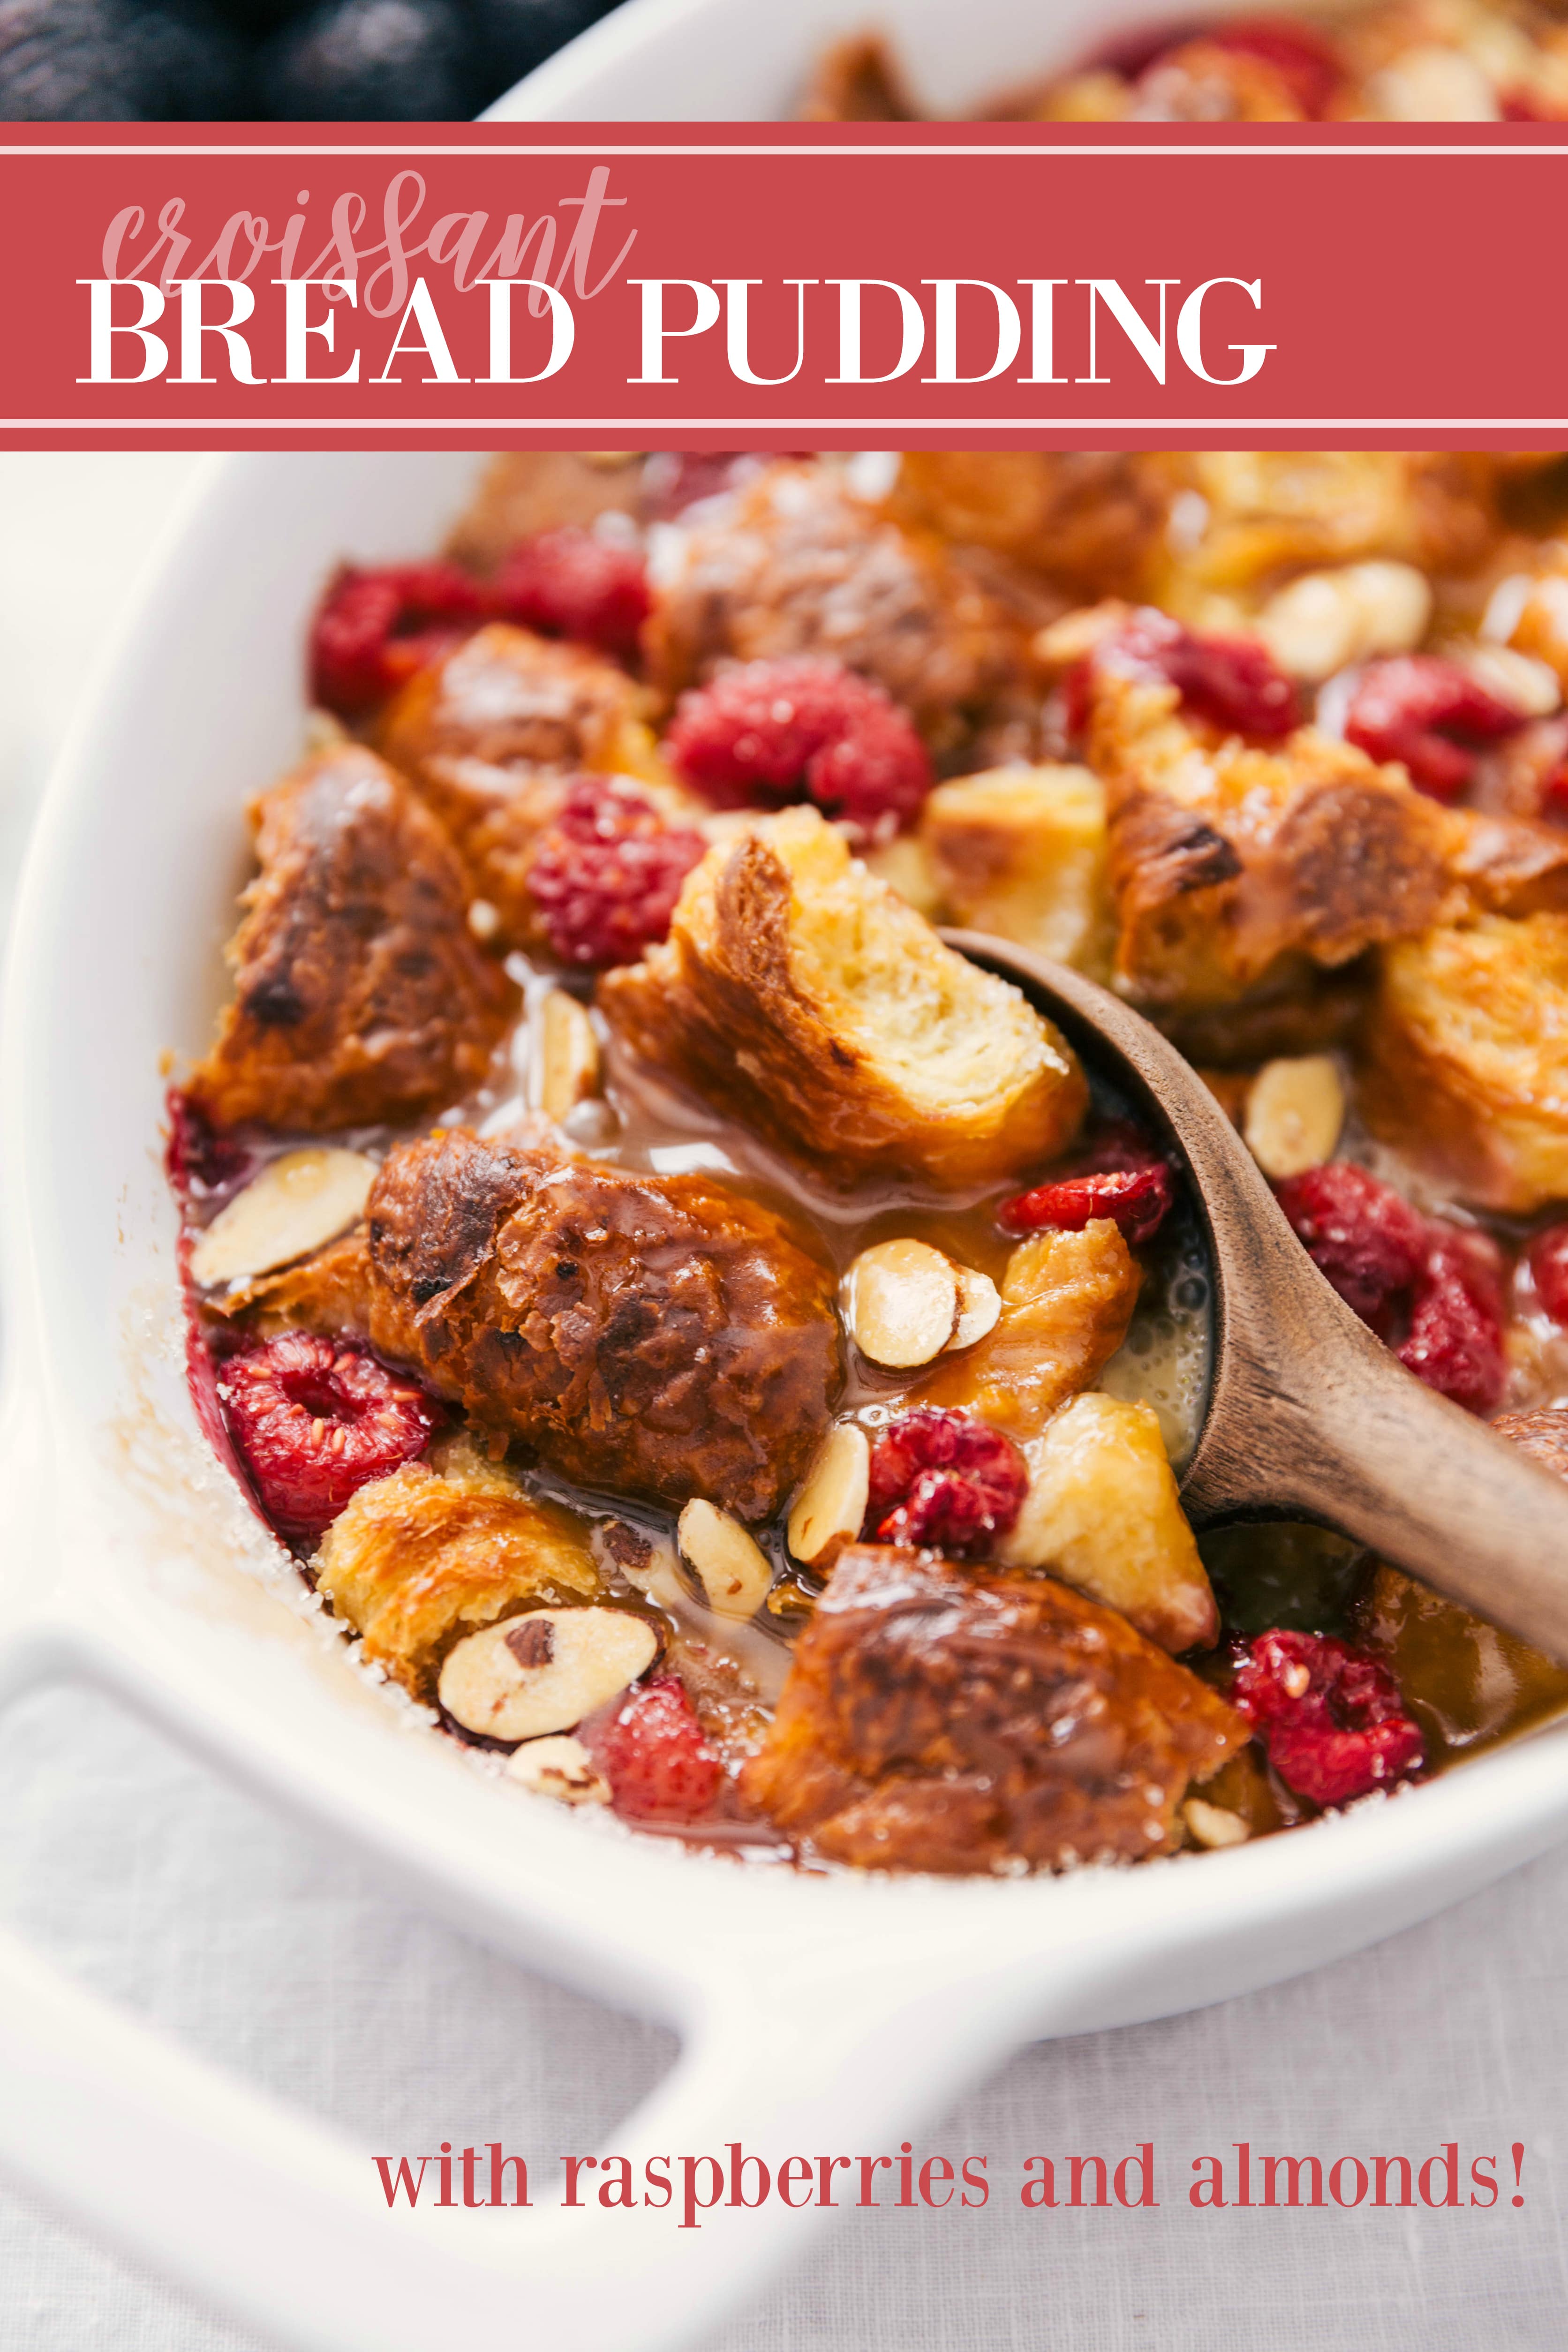 The best homemade bread pudding recipe with fresh raspberries, whipped cream, and a delicious vanilla sauce. Tips & tricks plus a few secret ingredients! via chelseasmessyapron.com #bread #pudding #recipe #easy #quick #kid #friendly #dessert #breakfast #brunch #shower #croissant #custard